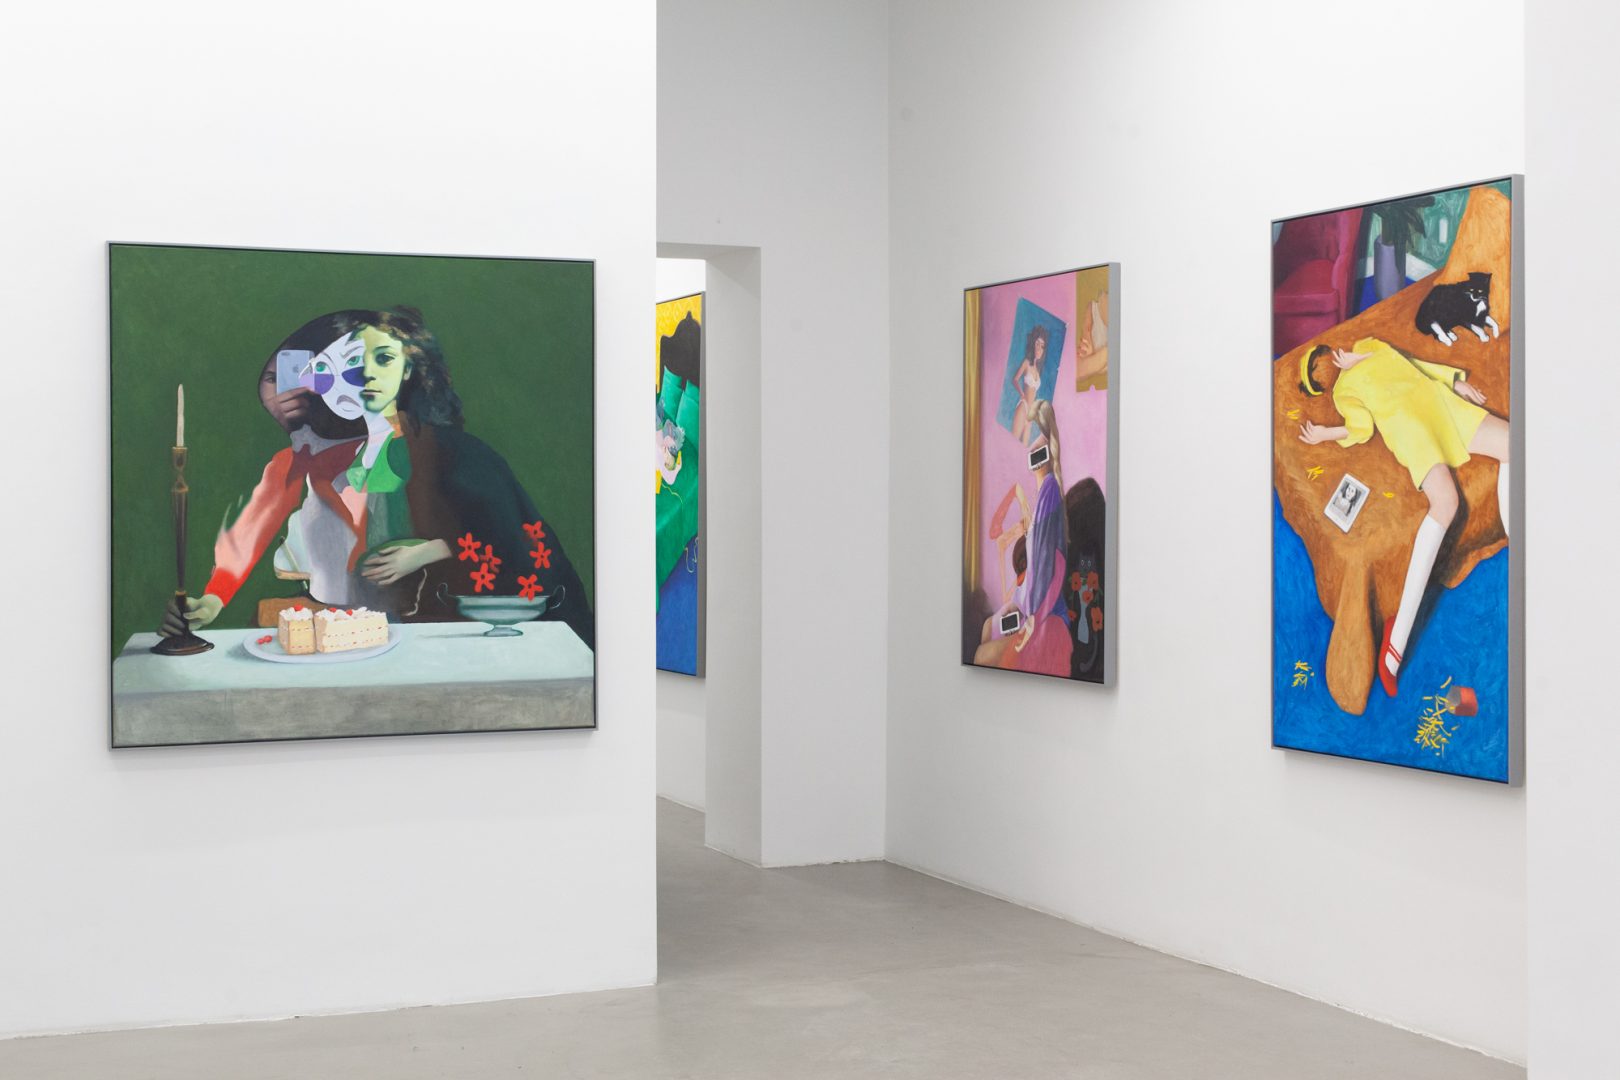 Self-ish (exhibition view), Galerie Russi Klenner, Berlin, 2022, courtesy of Galerie Russi Klenner